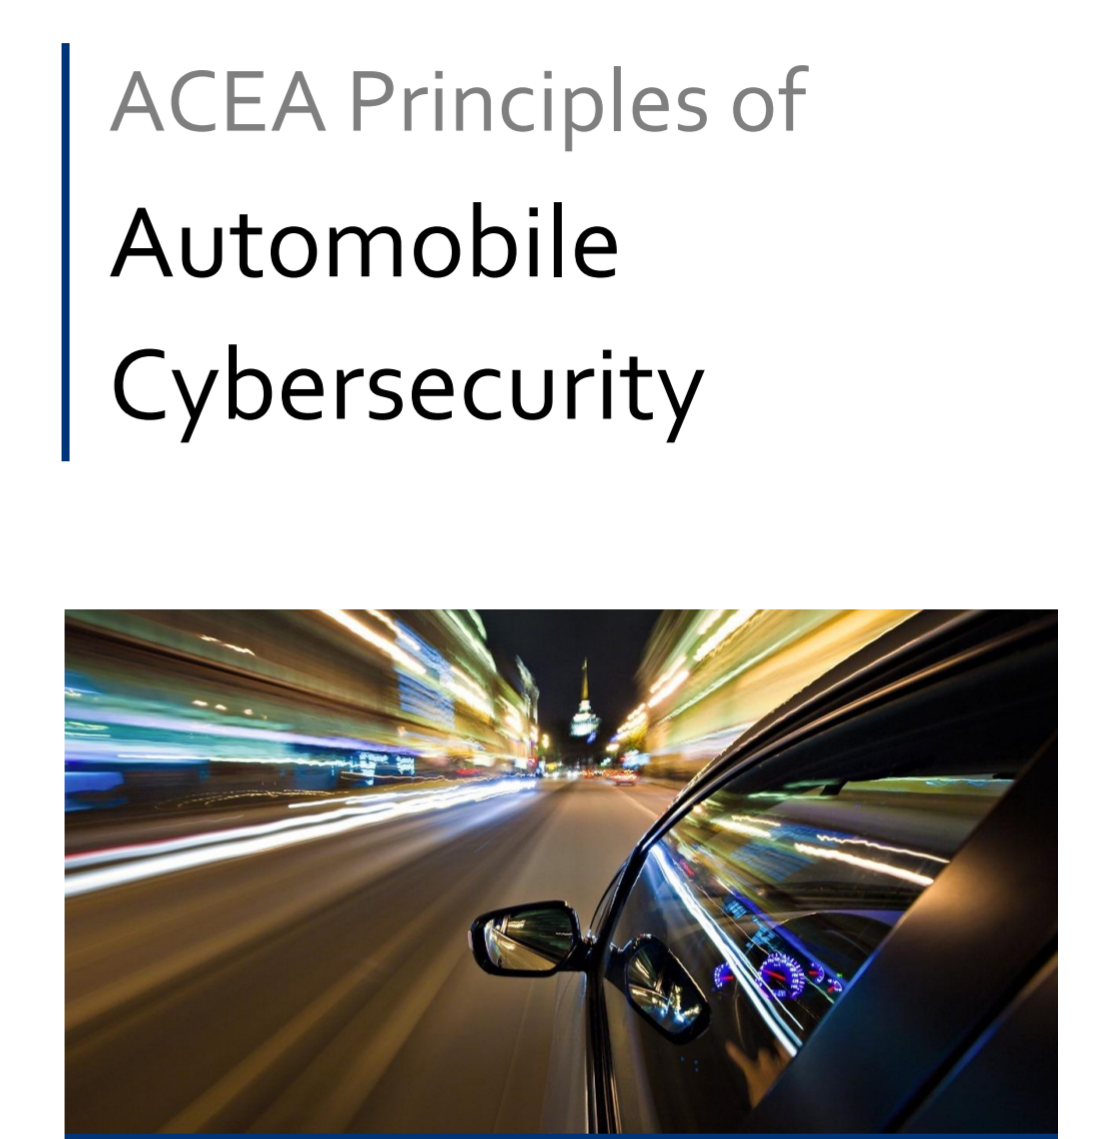 Cybersecurity Engineering in the Automotive industry